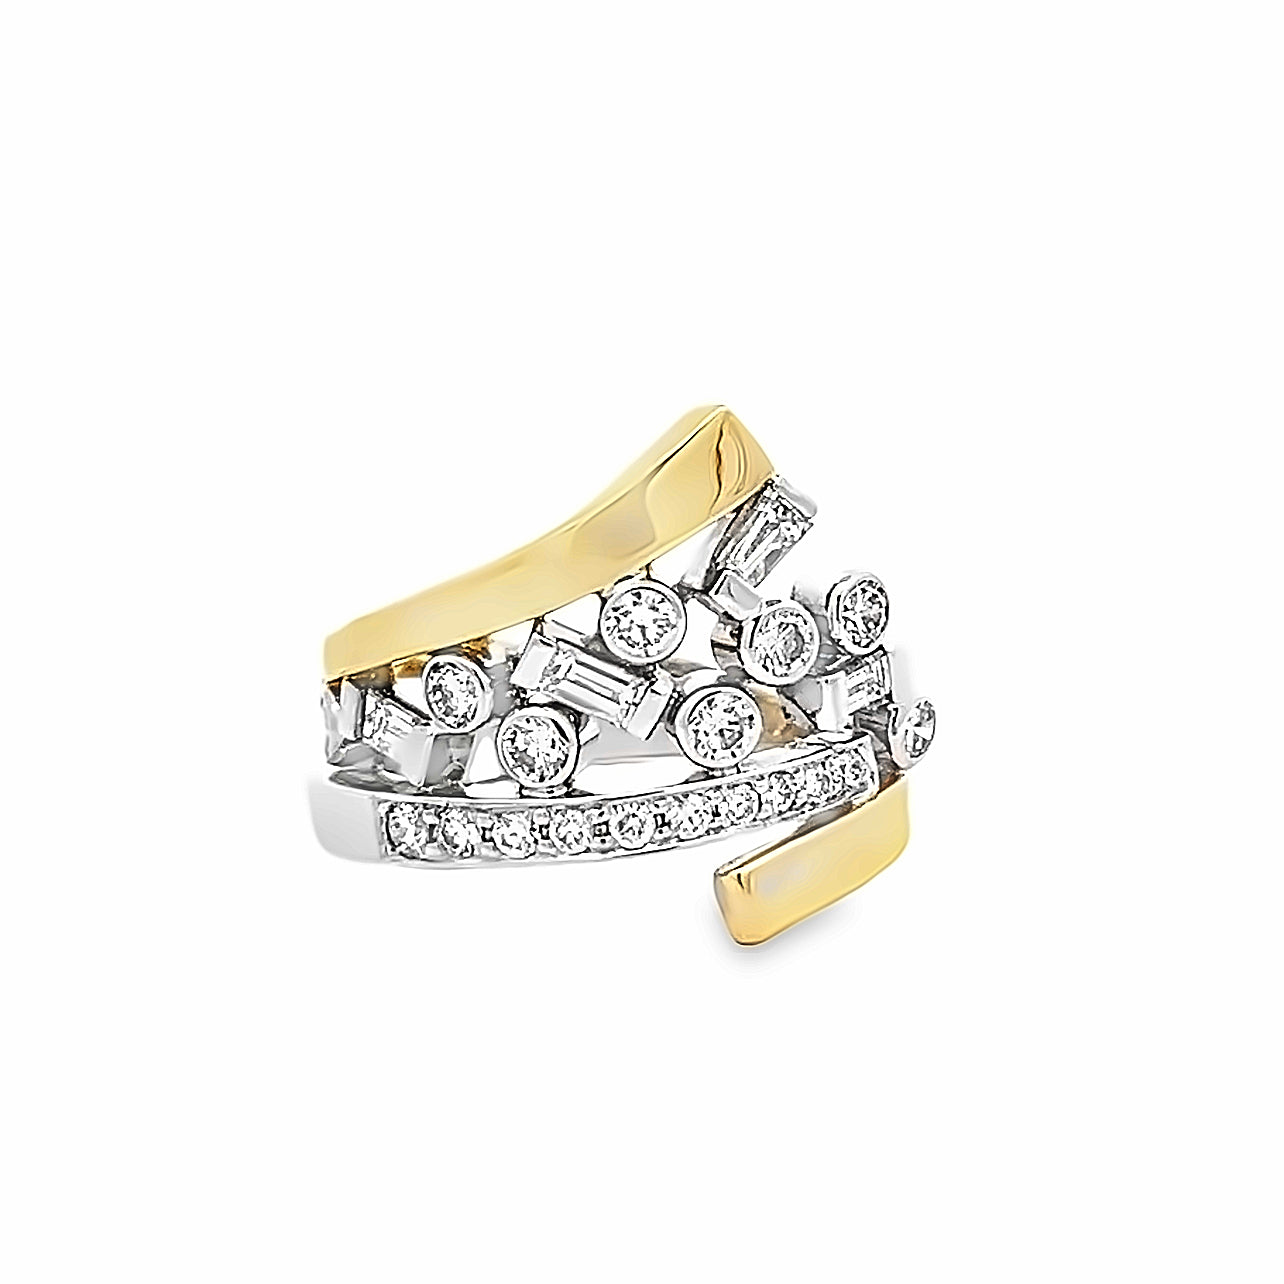 14k Two Tone Yellow and White Gold Round and Baguette Diamond Bypass Ring by Paul Richter (1.22ctw.)